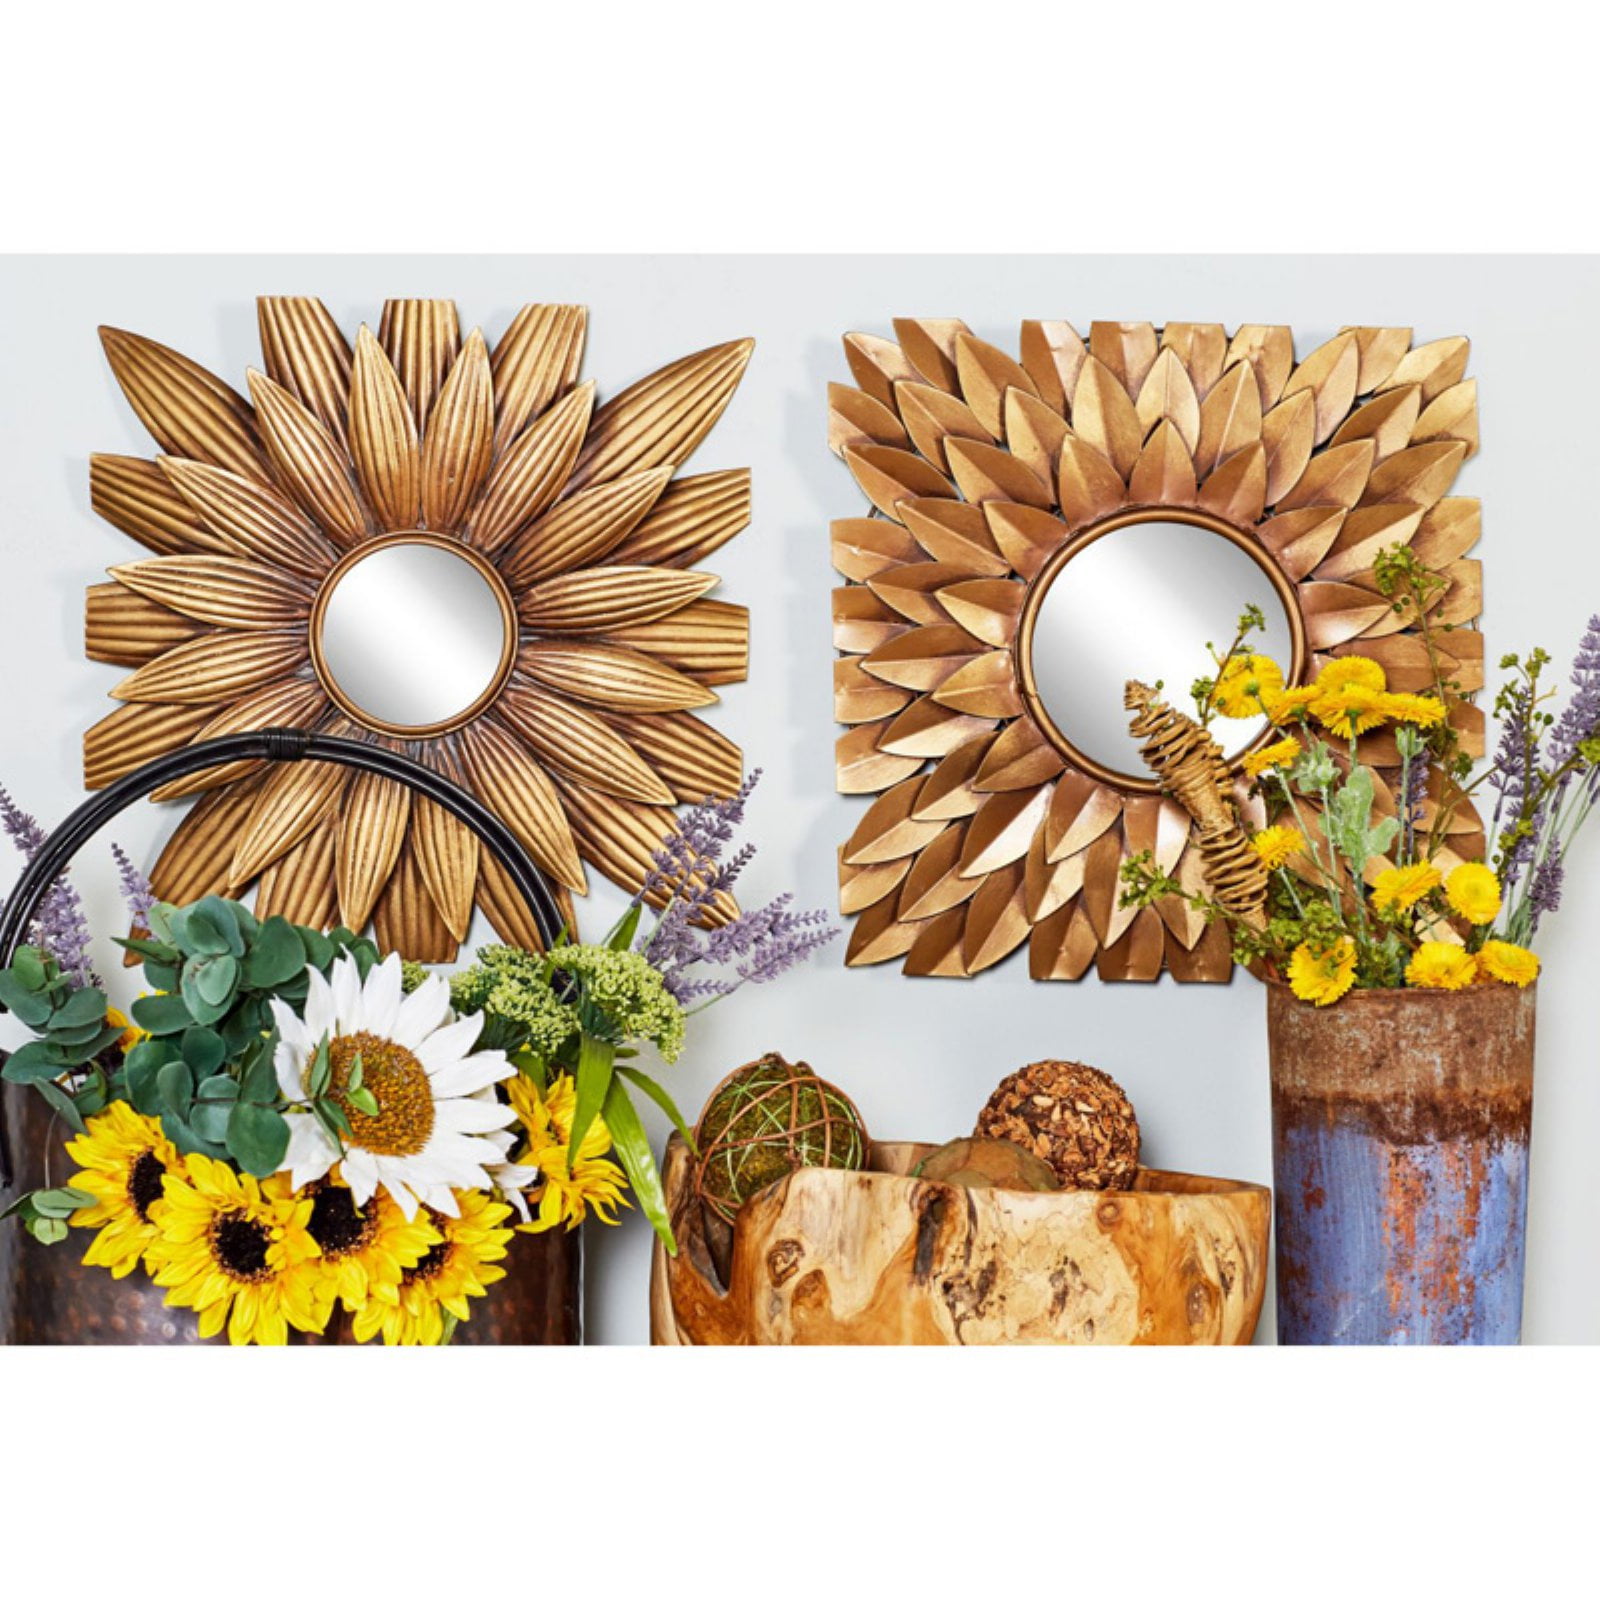 DecMode 23" Large Square Gold Metal Wall Decor with Round Mirrors | Set of 9 - Walmart.com ...